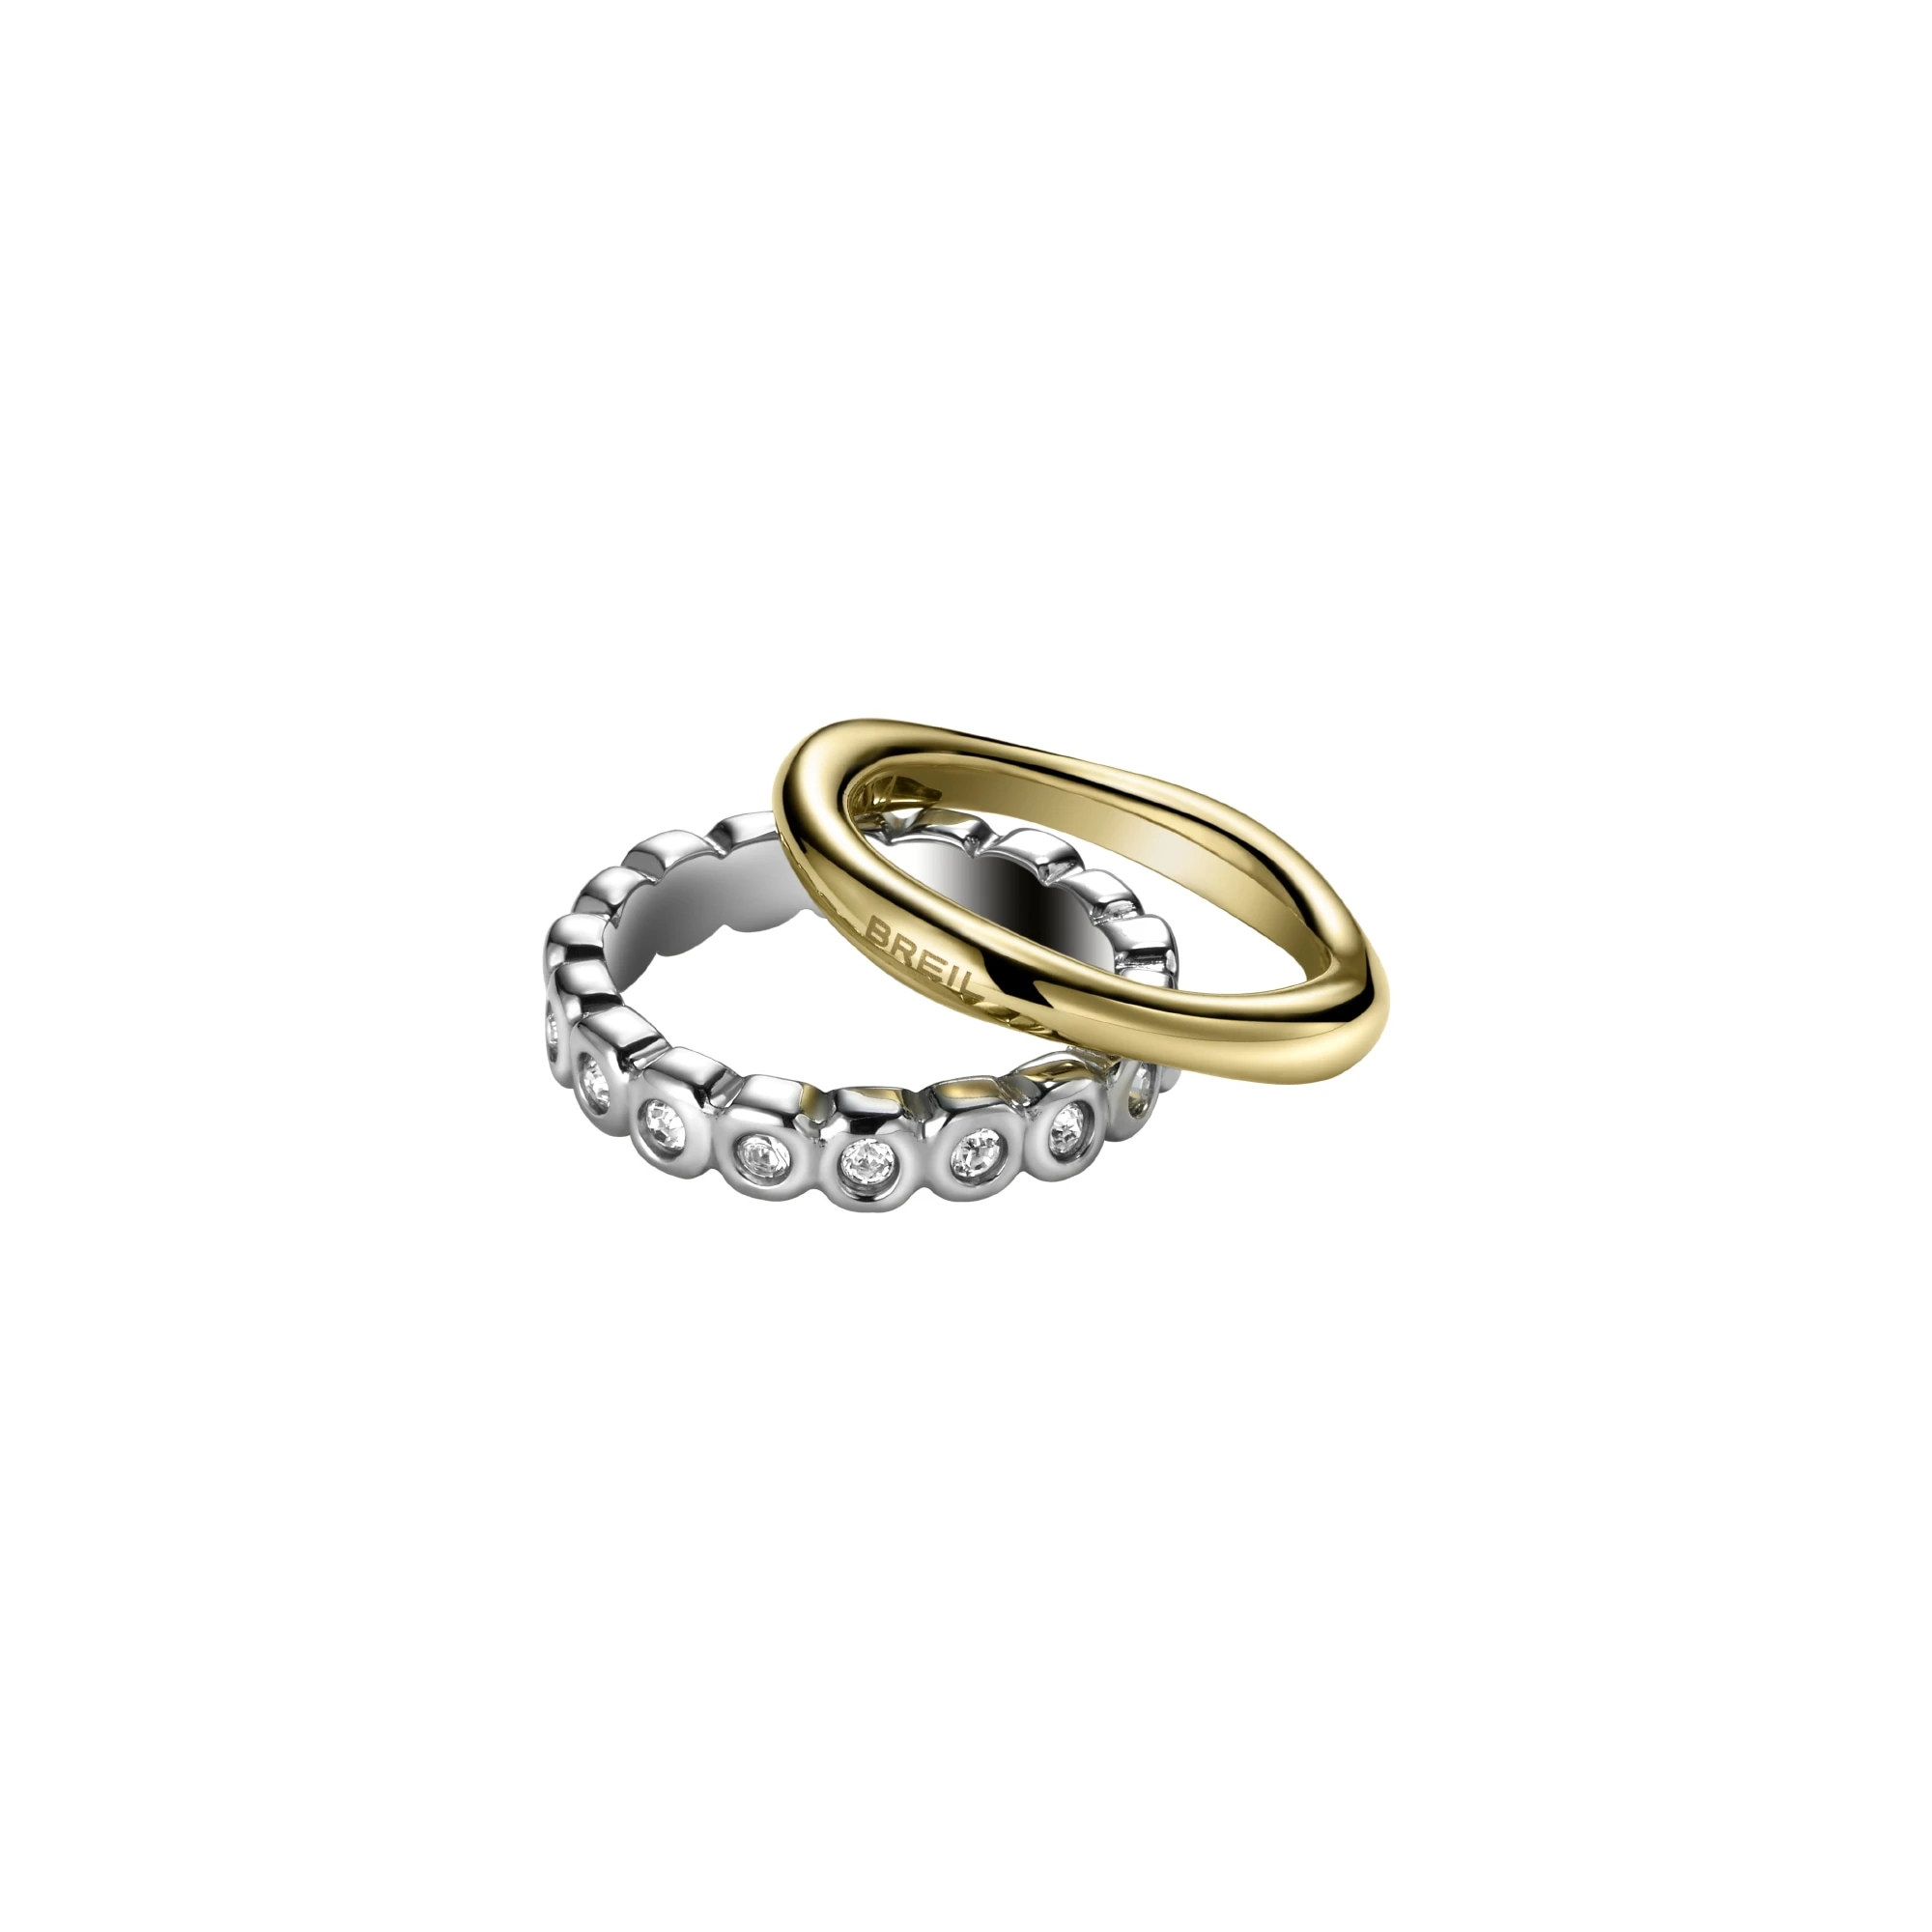 ROLLING DIAMONDS - RING WITH GOLD IP DETAIL AND WHITE CRYSTALS - 1 - TJ1543 | Breil